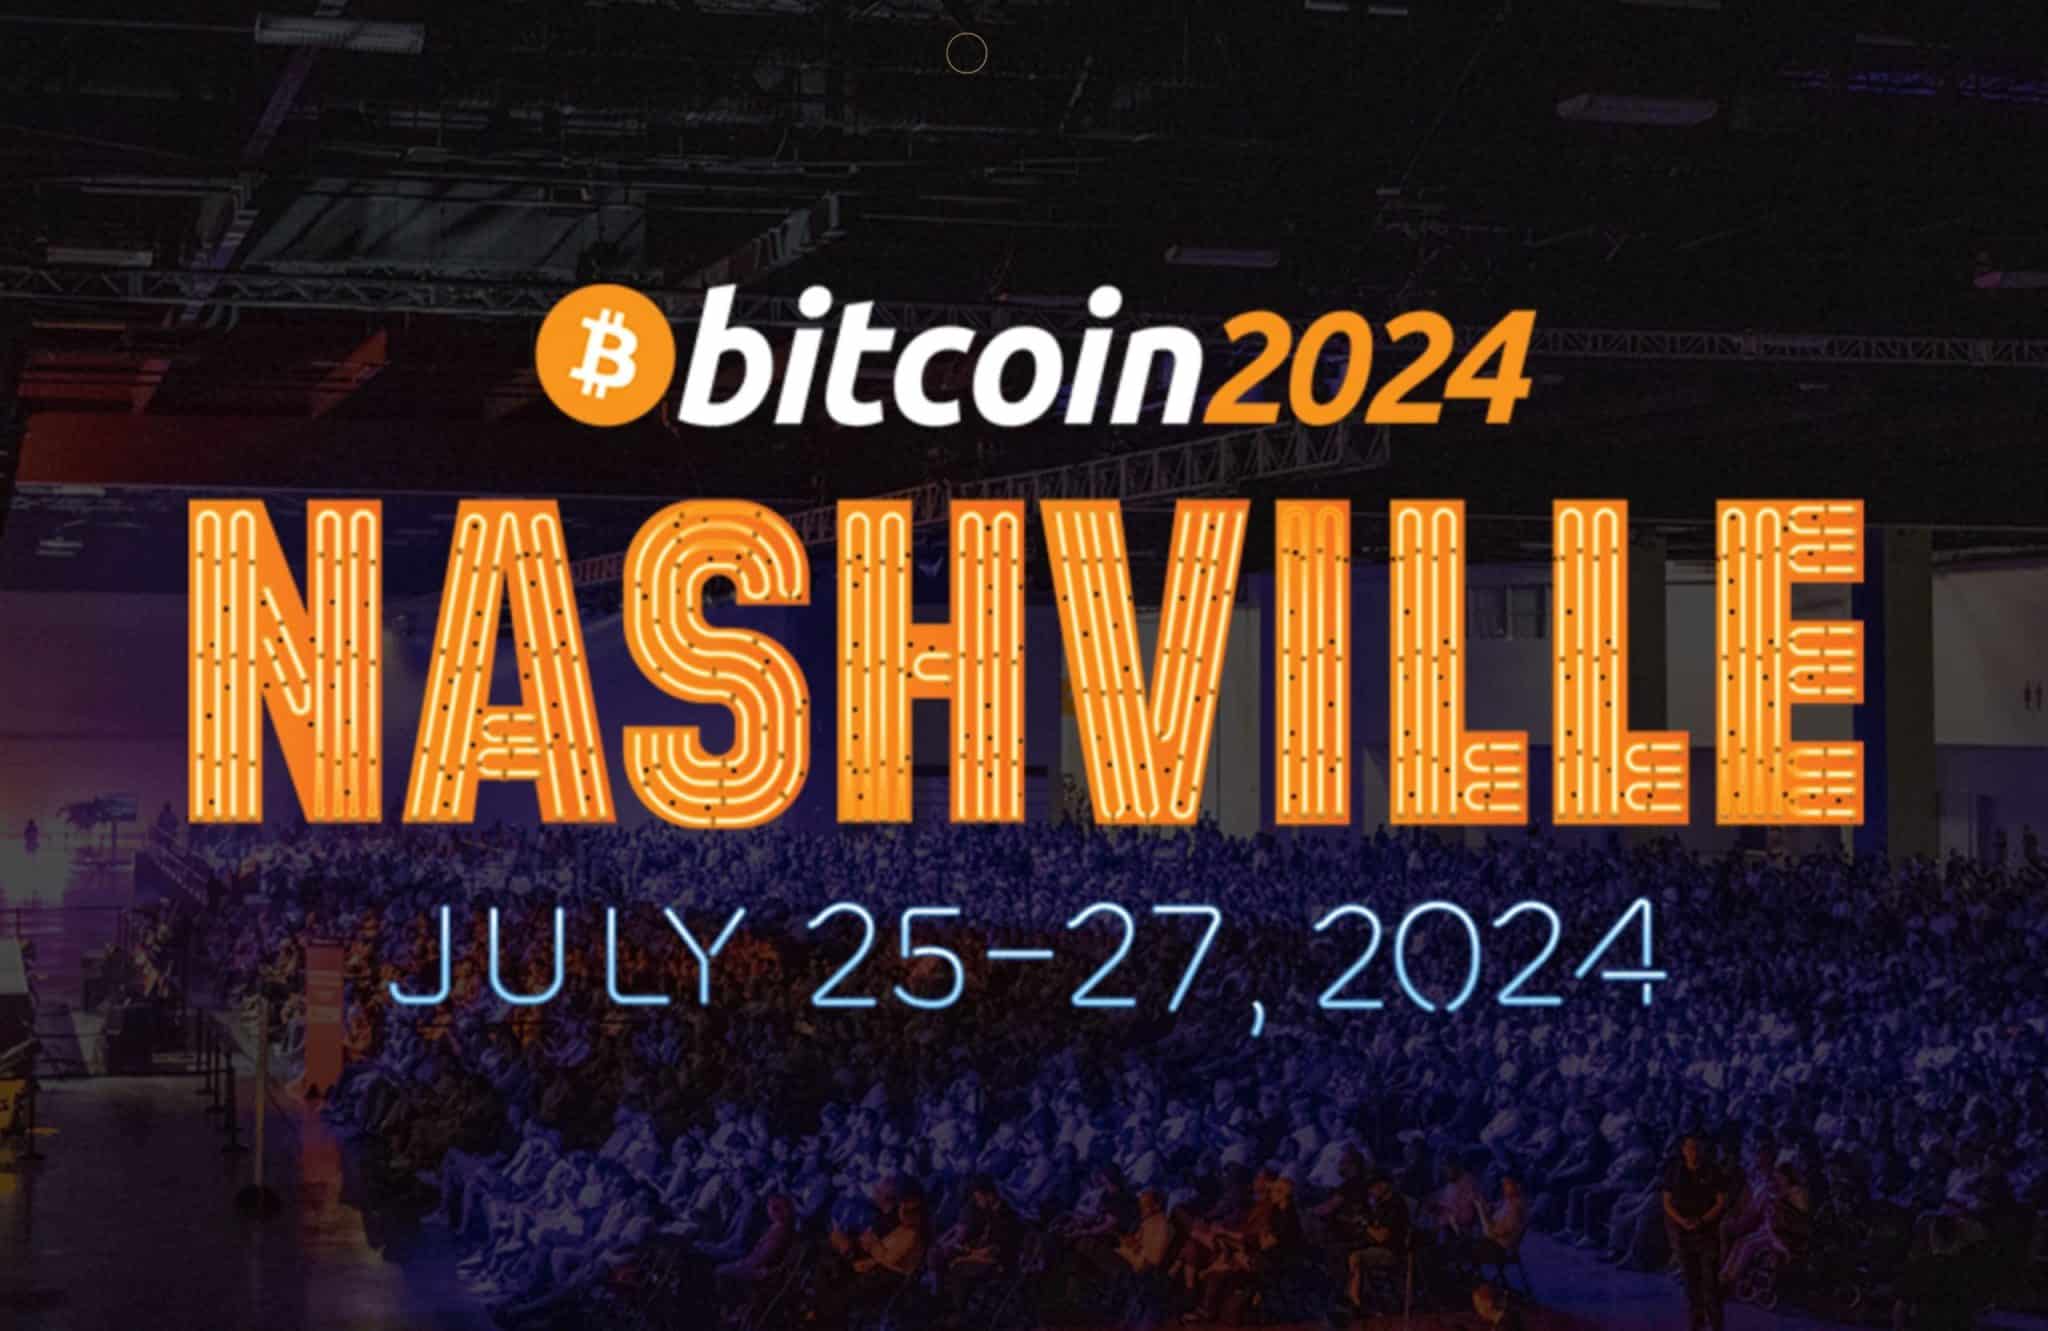 Bitcoin Nashville: the must-attend Bitcoin conference for crypto enthusiasts and BTC professionals. Hear from top industry leaders and more.